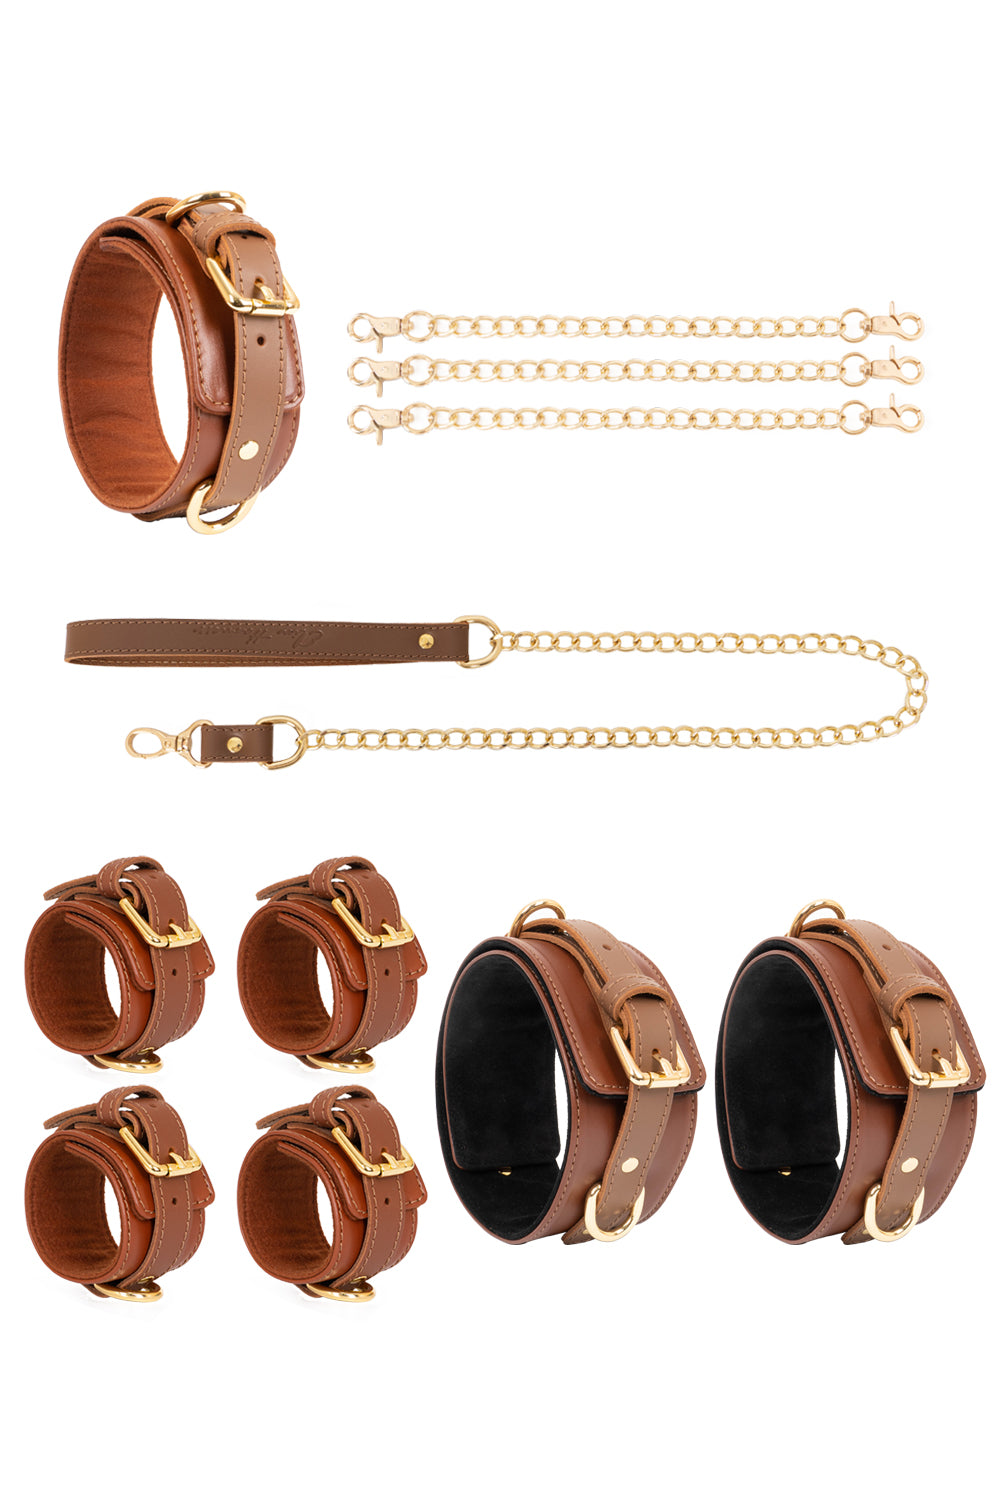 Leather set 4 in 1 with chain leash and connectors. 10 colors